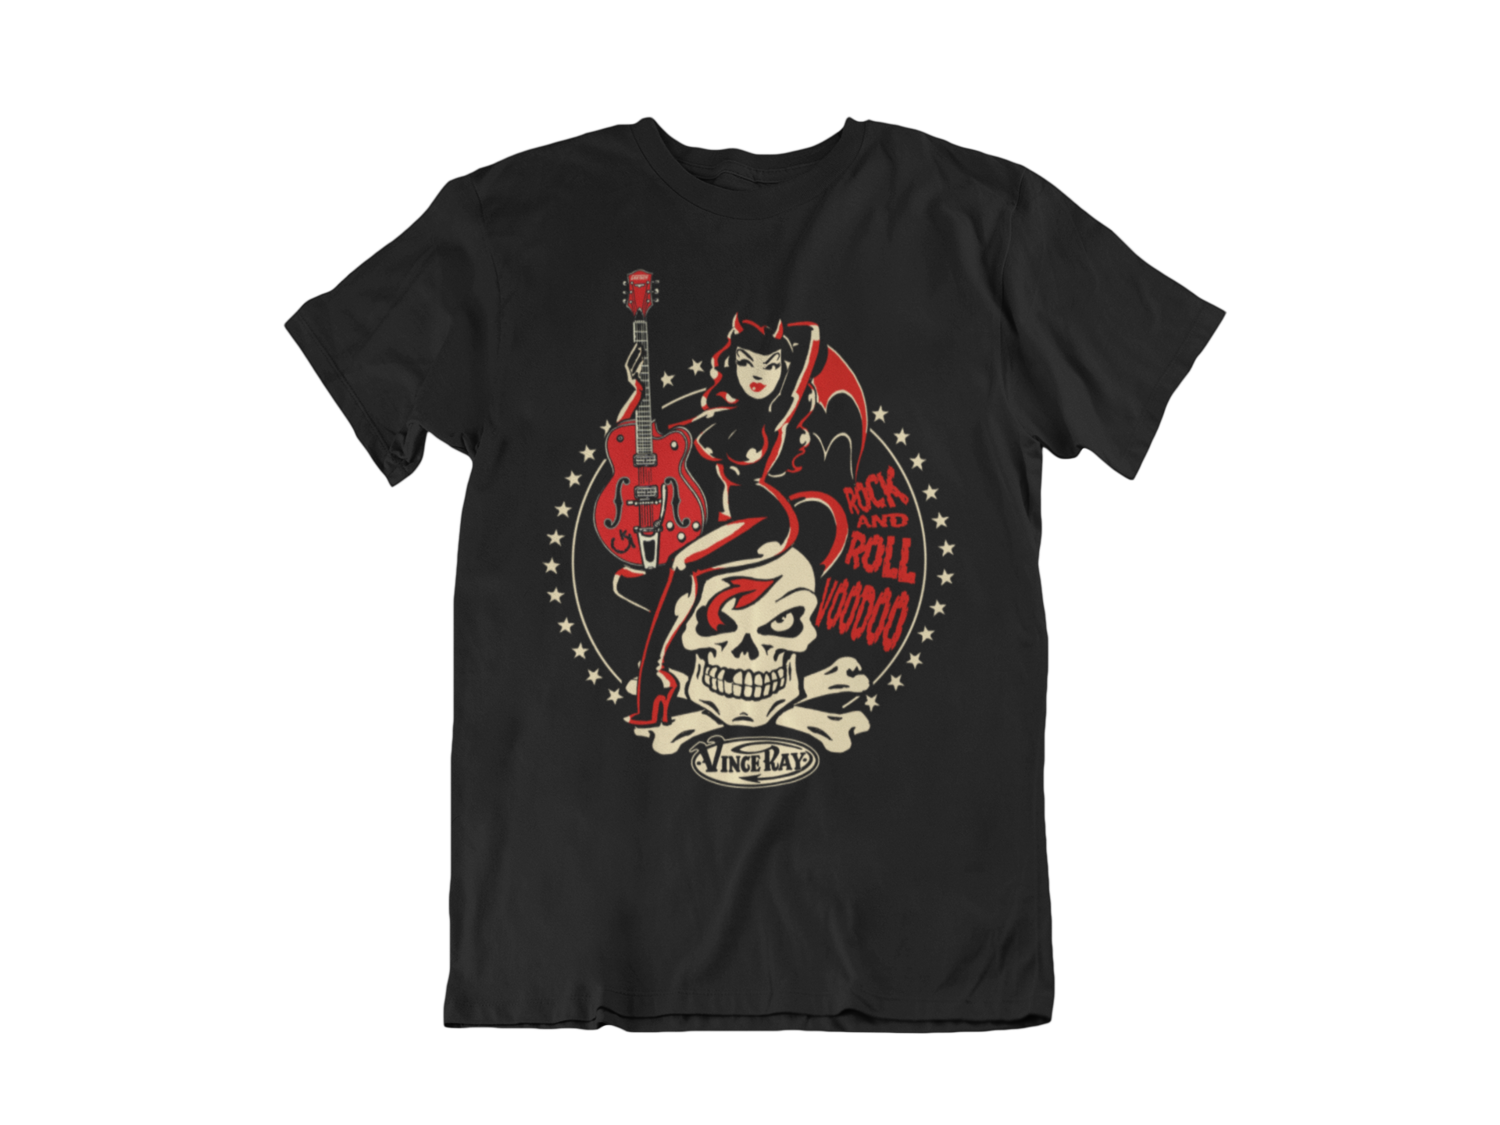 ROCK AND ROLL VOODOO T-SHIRT MAN by VINCE RAY